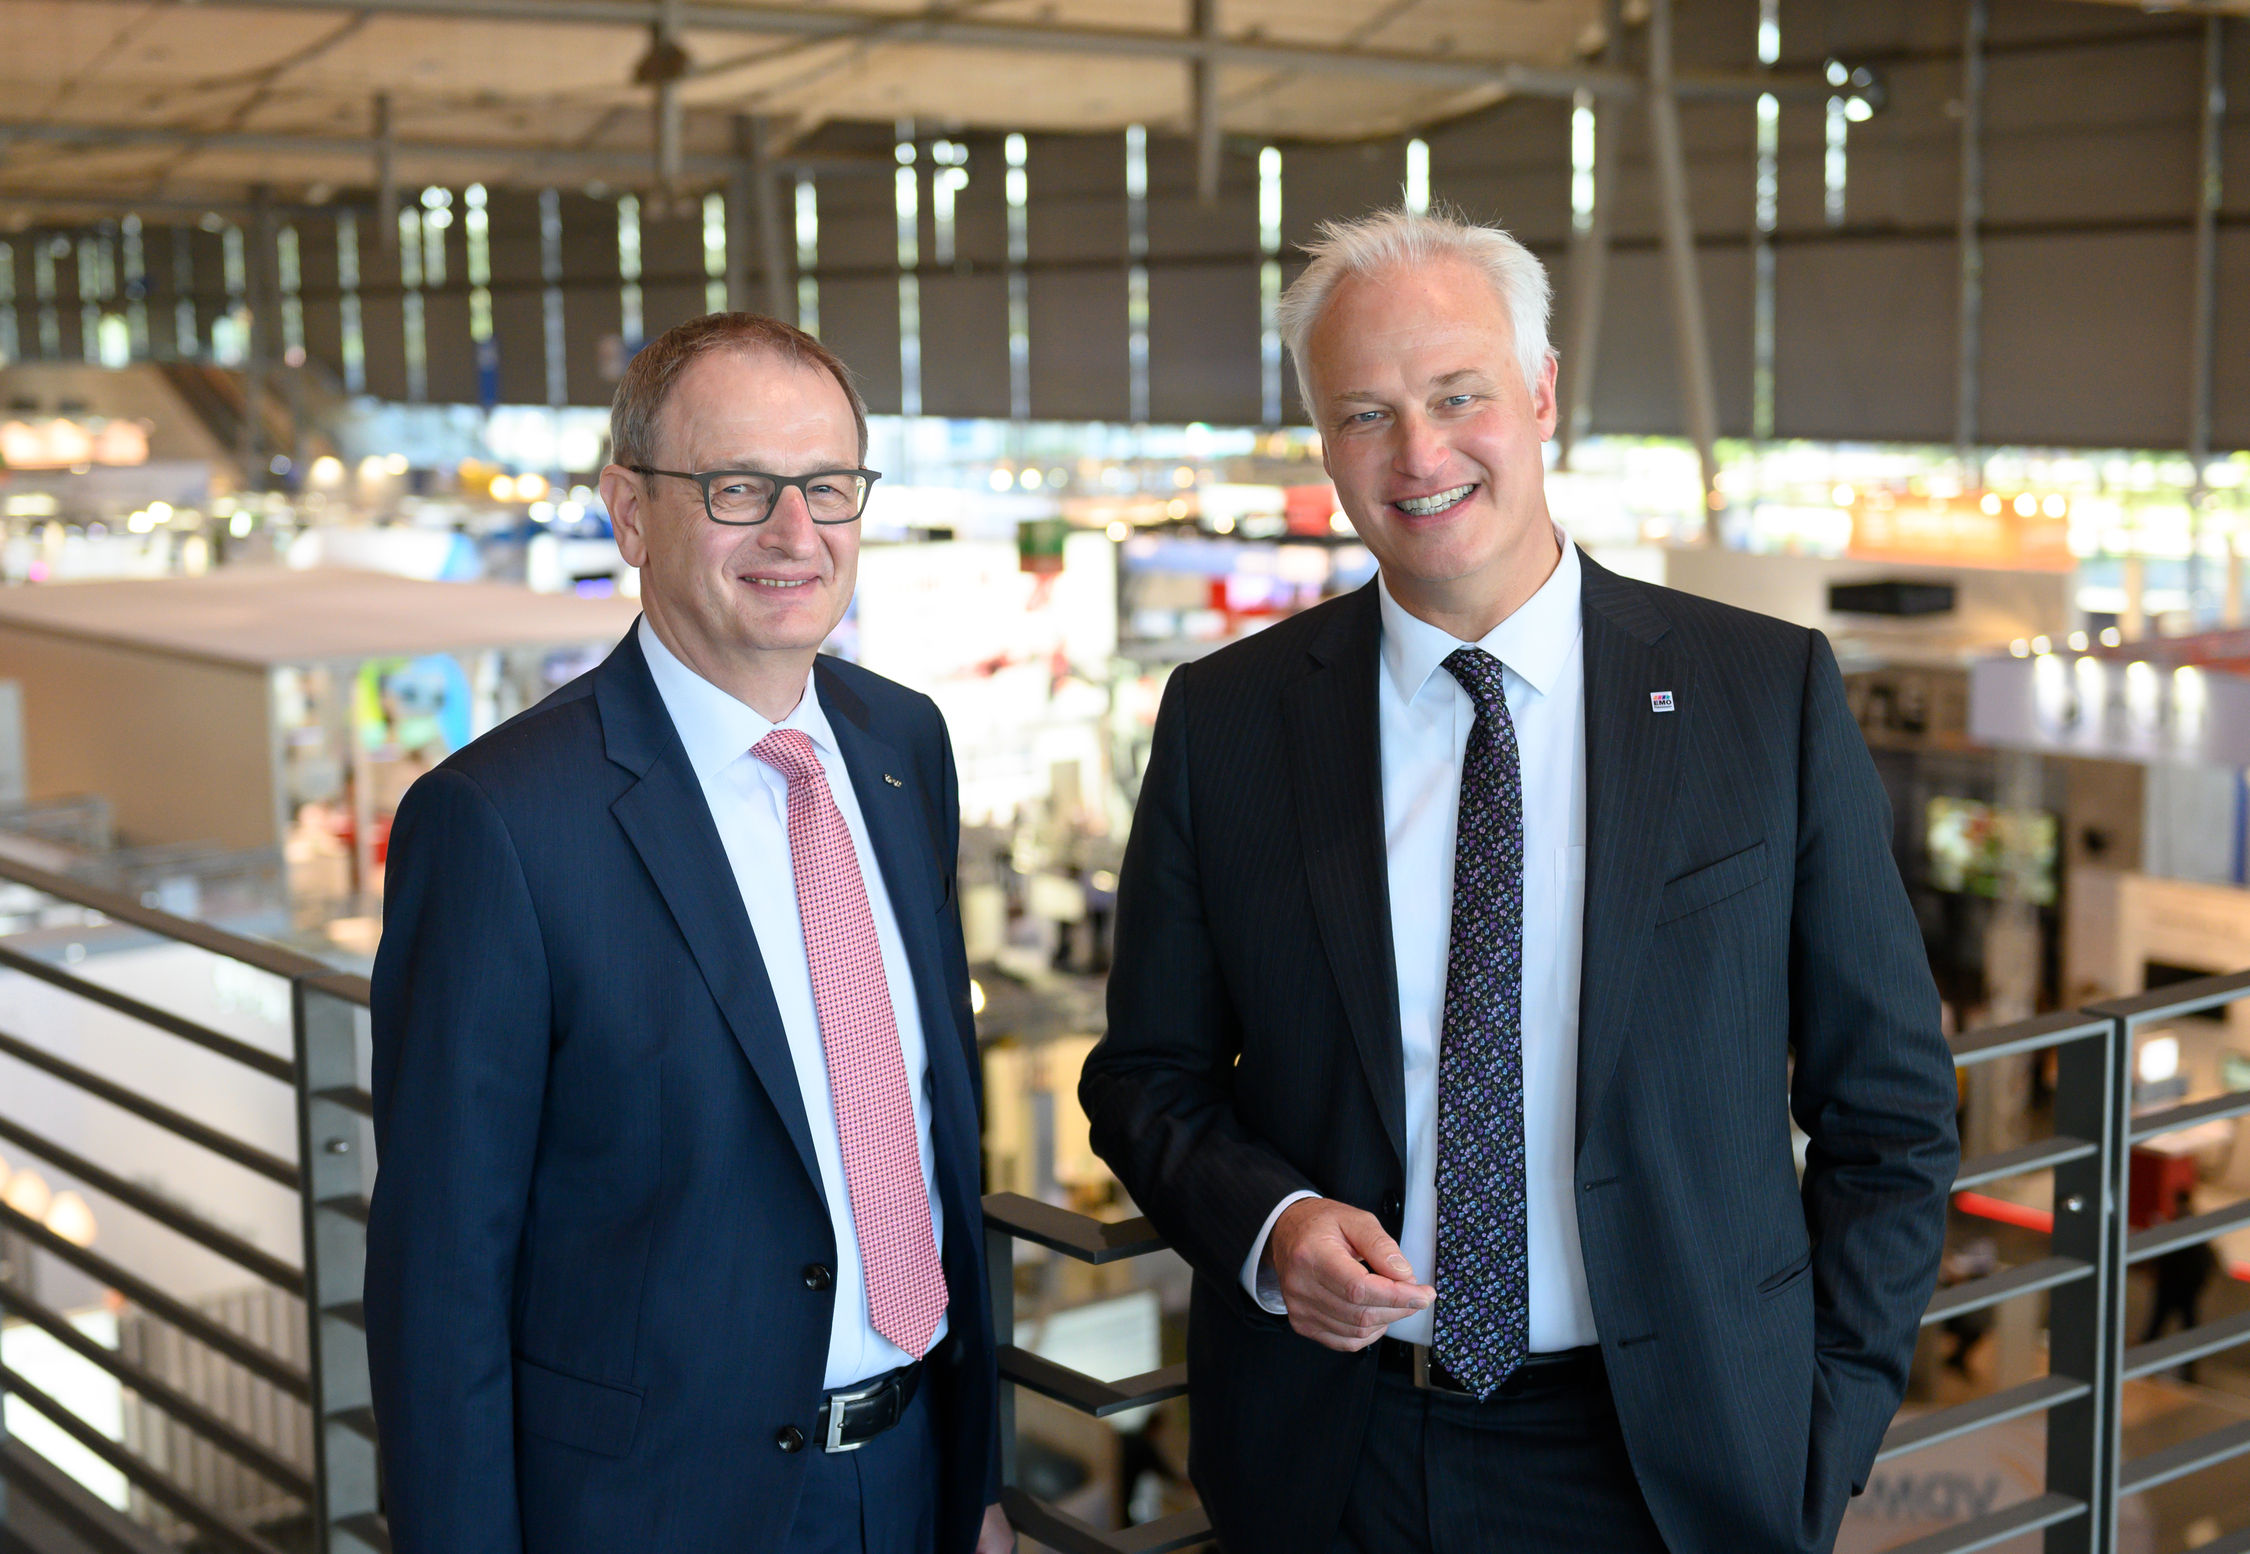 Carl Martin Welcker, EMO General Commissioner, (r) and Dr. Wilfried Schäfer, CEO of the EMO event organizer VDW (German Machine Tool Builders’ Association), looking back on a successful EMO Hannover 2019.